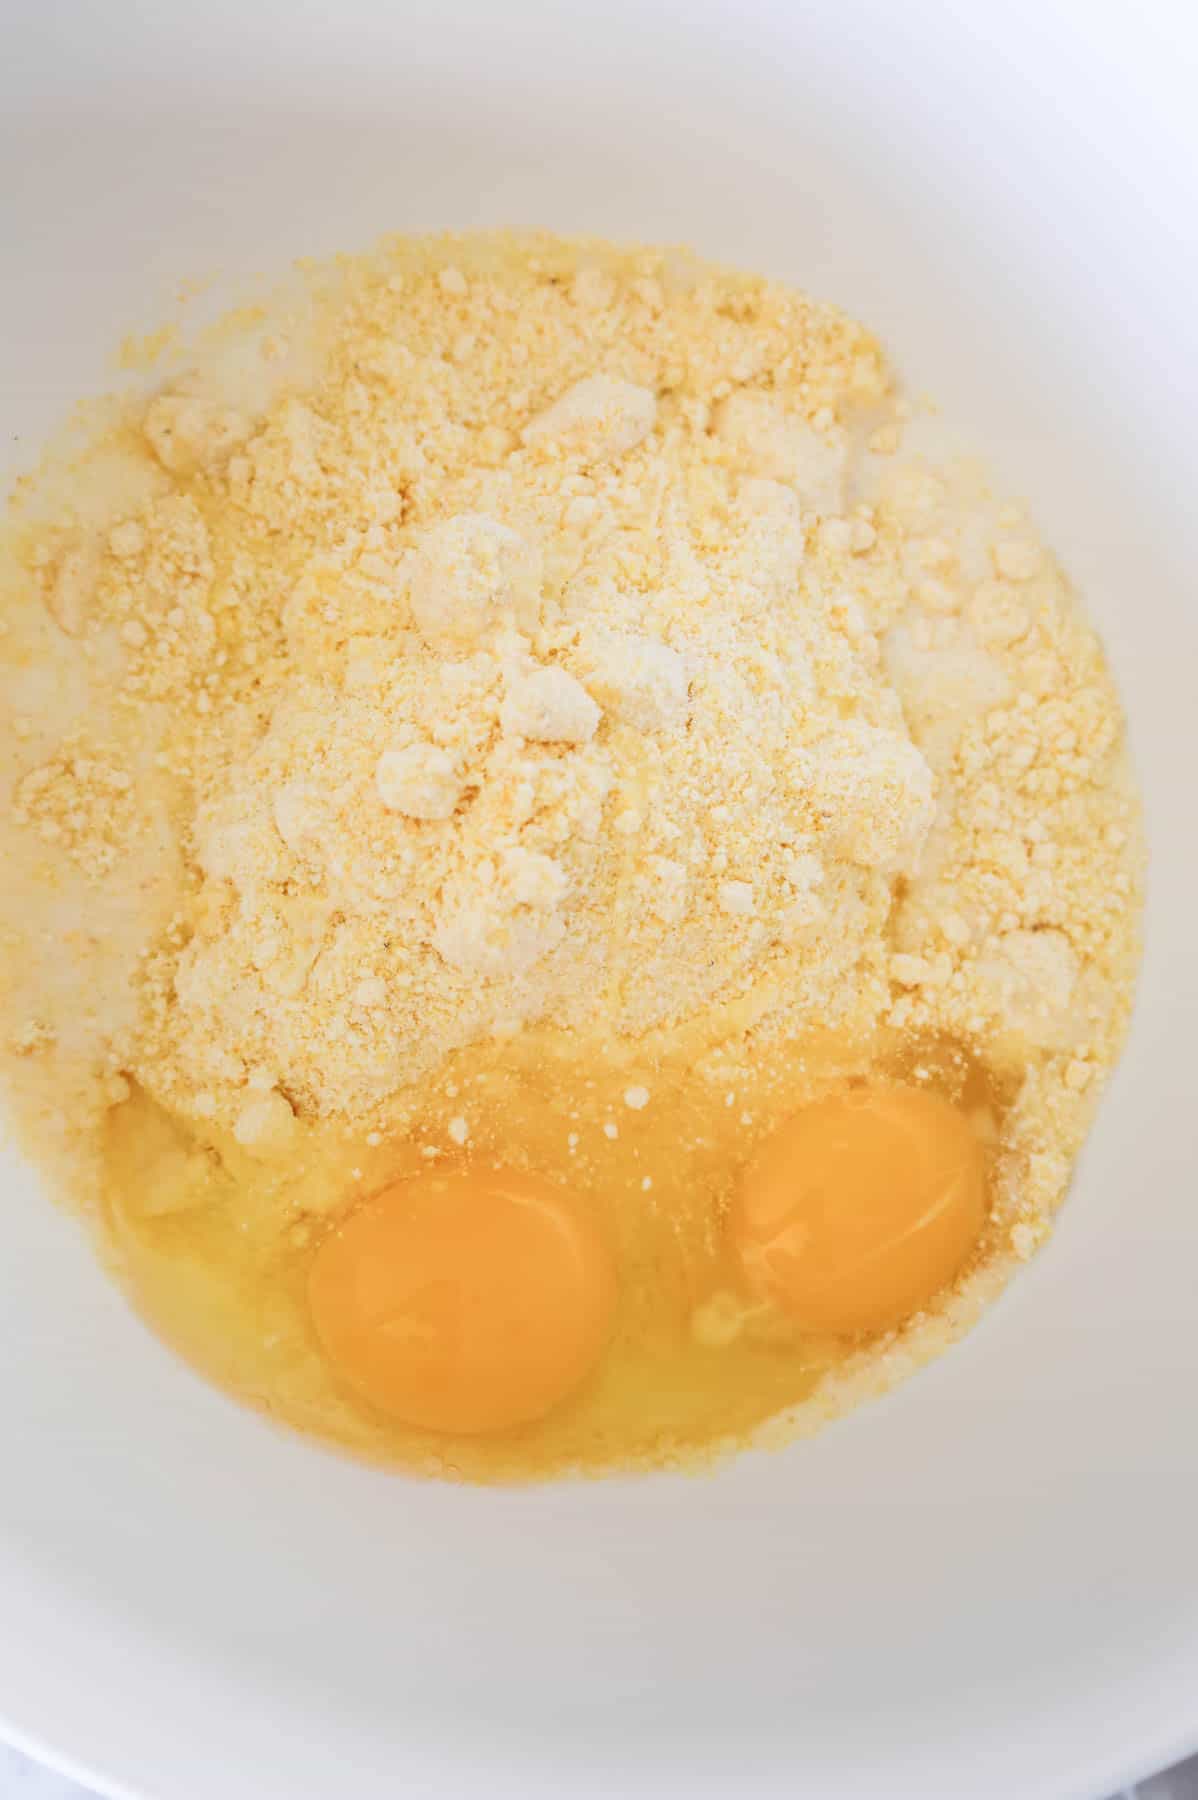 Jiffy corn mix, eggs and milk in a bowl